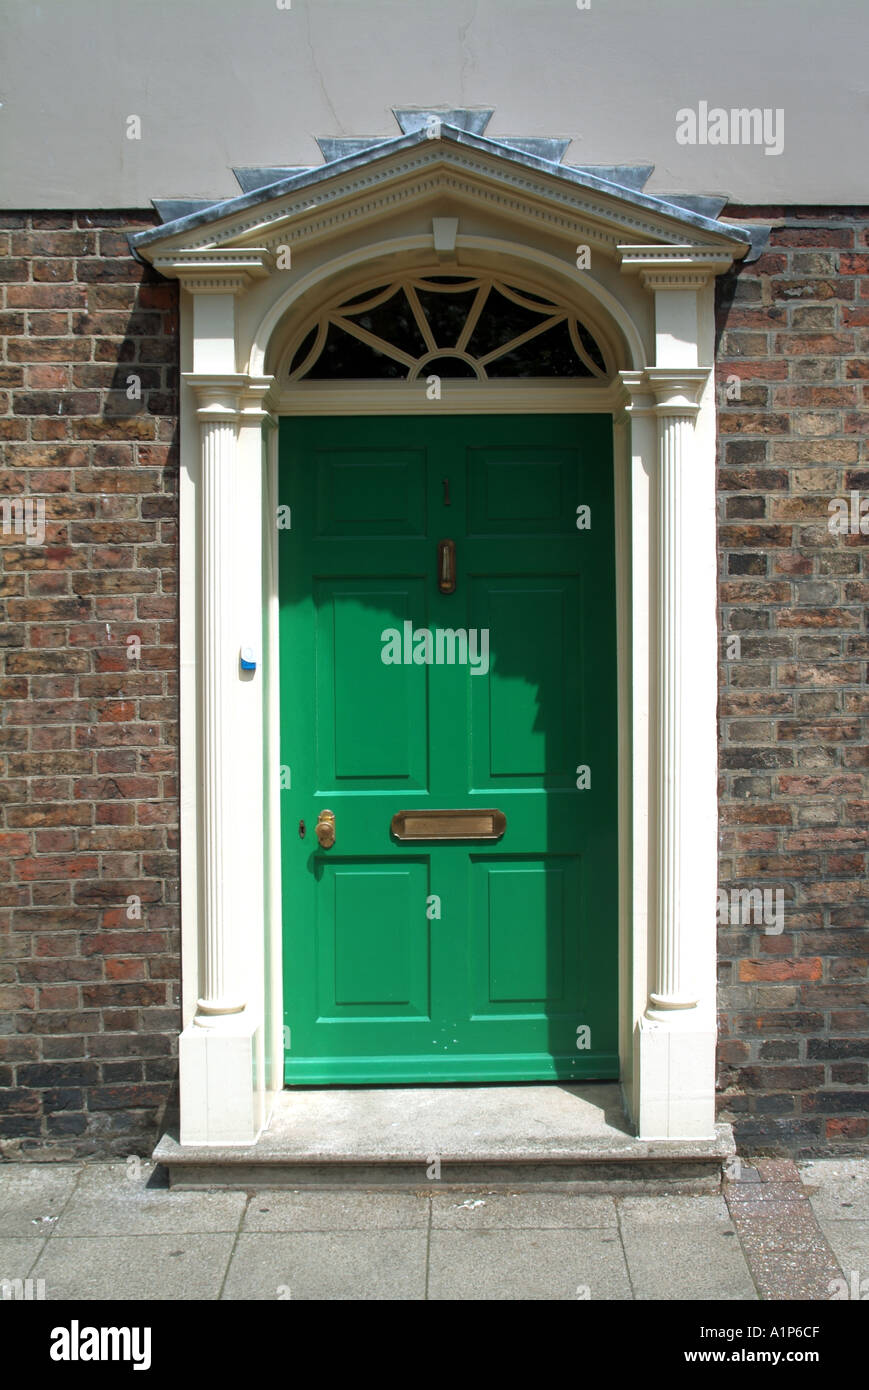 Green residential front door with white surround opening directly onto pavement Stock Photo